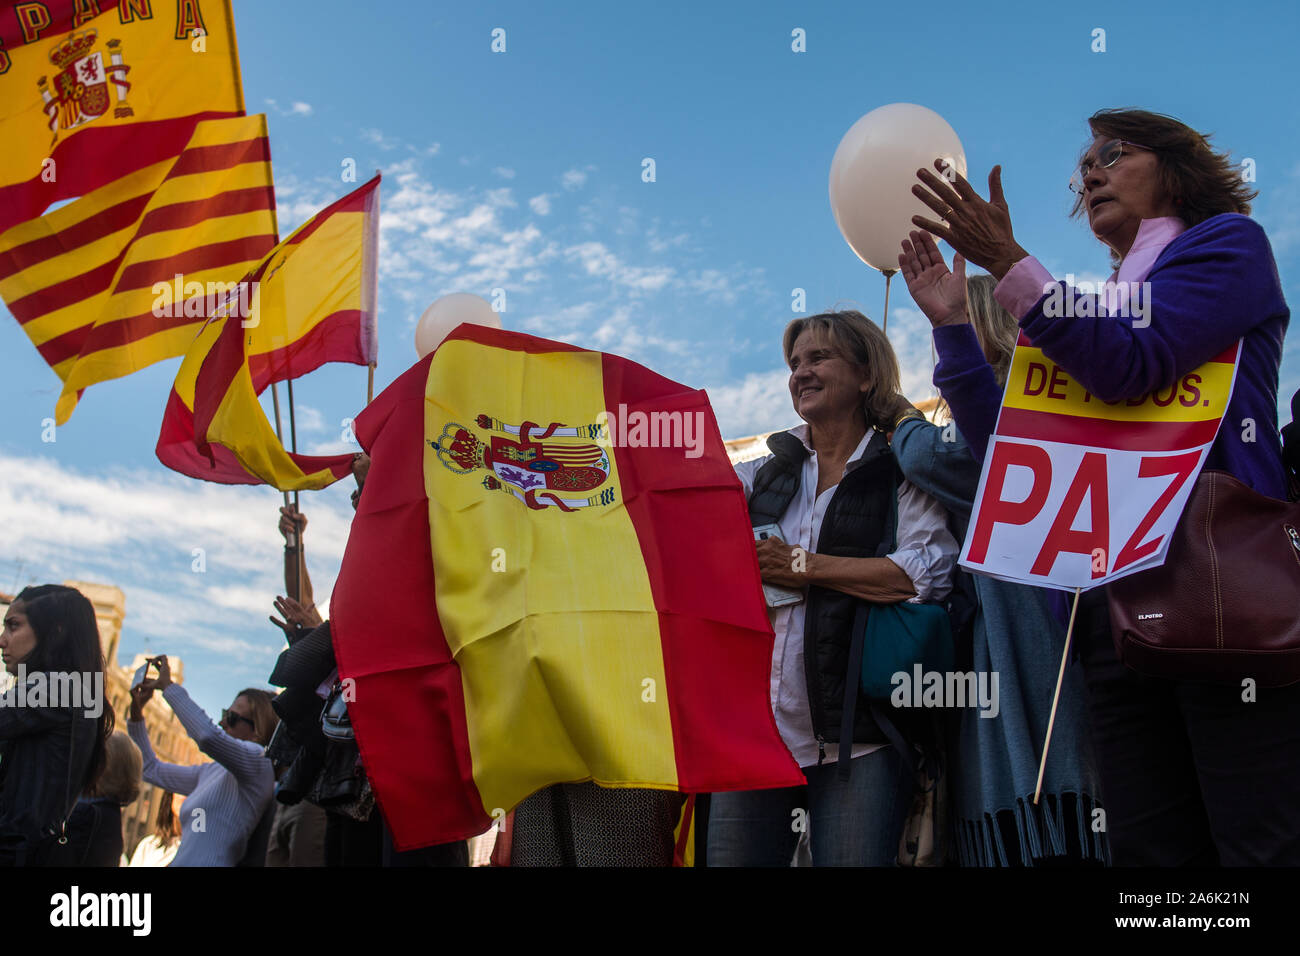 Madrid, Spain. 27th October, 2019. People protesting against violence in Catalonia. Anti separatists groups have gathered to demand the end of violence in the streets of Catalonia that happened in the past days after the jail sentence for the Catalan Leaders. Credit: Marcos del Mazo/Alamy Live News Stock Photo